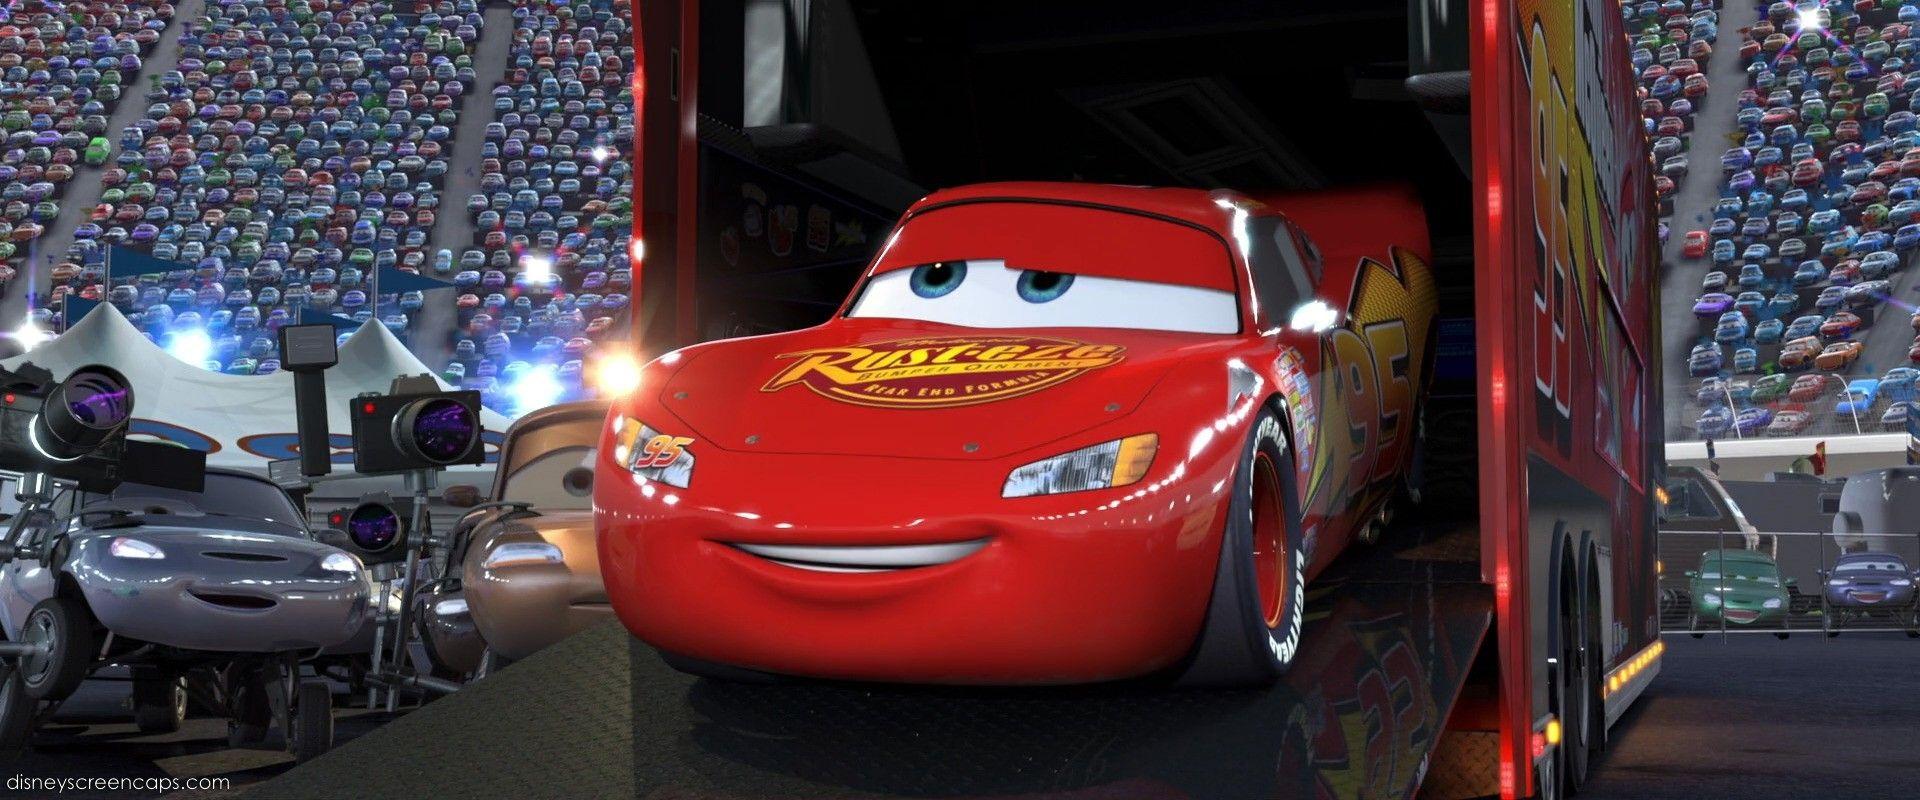 Lightning McQueen Image Ka Chow HD Wallpaper And Background